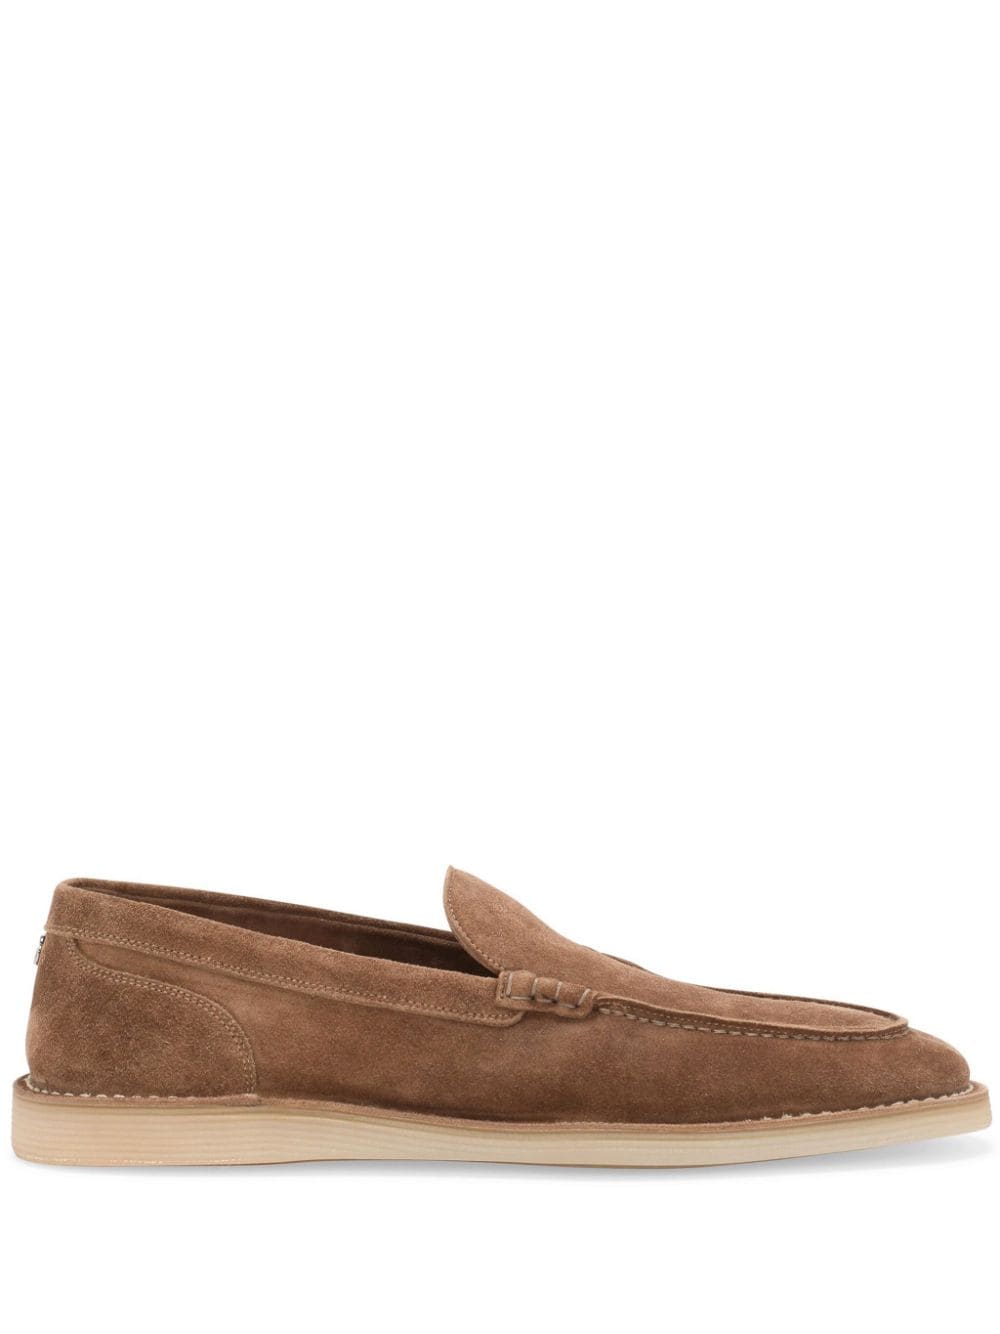 Dolce & Gabbana Dg-plaque Suede Loafers In Brown